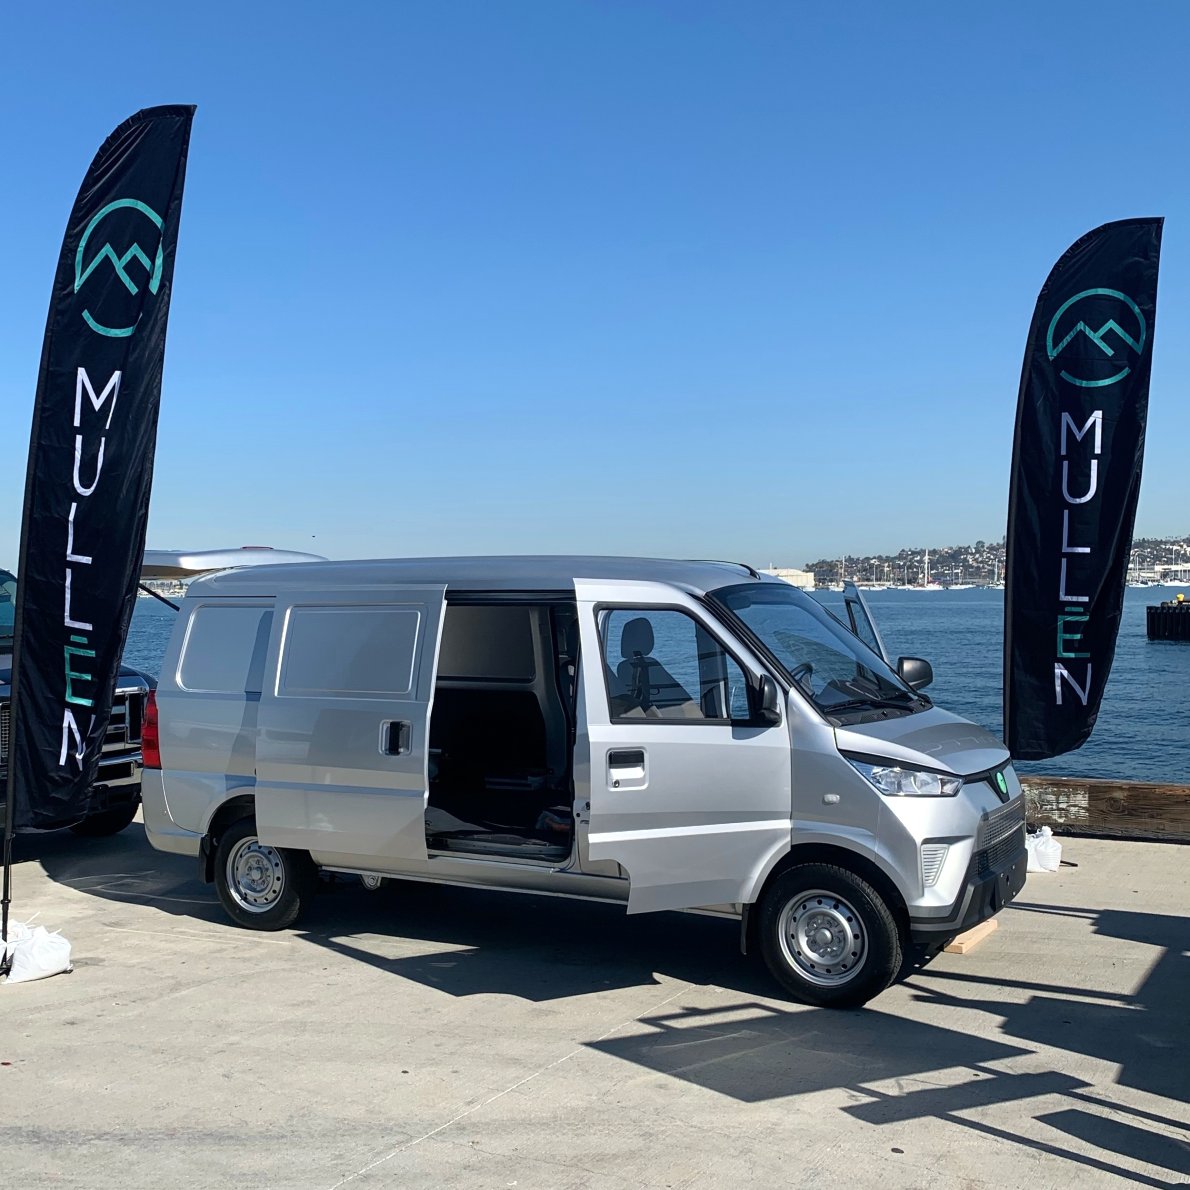 It’s a beautiful day in San Diego, CA; the #MullenONE #EV cargo van is on display at Port Pavilion until 3 pm today. Come down and visit us by the bay at SDG&E’s #EVFleetDay 2023.

#MullenCommercial #MullenUSA #AltFuels #CleanEnergy #FleetManagement #Class1 #CommercialEV #EVFleet